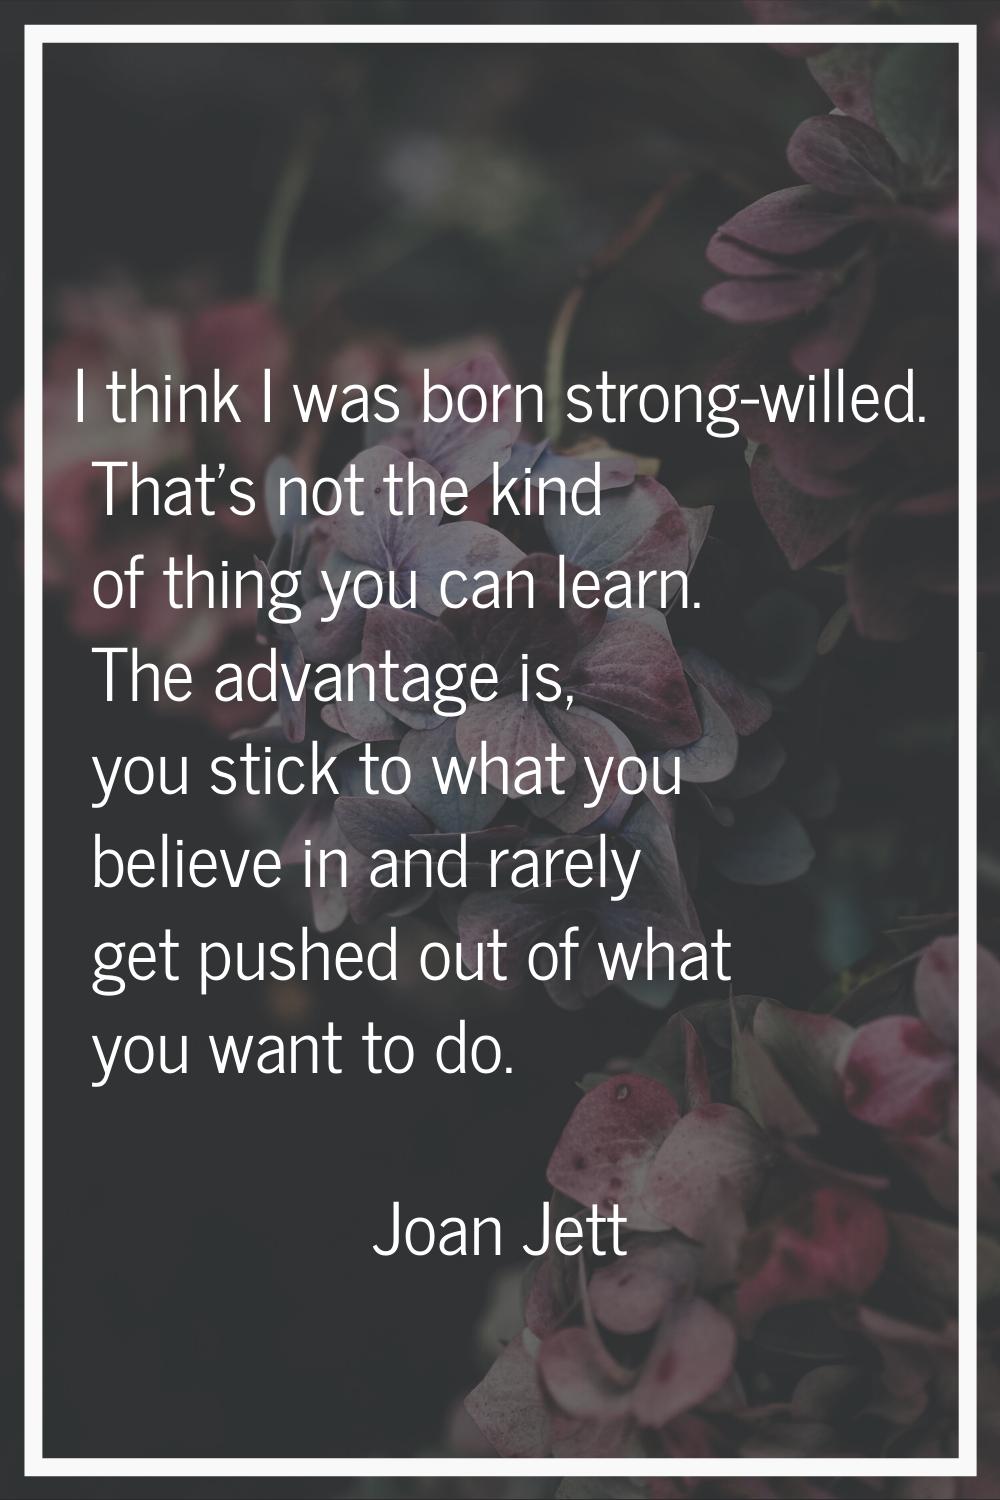 I think I was born strong-willed. That's not the kind of thing you can learn. The advantage is, you